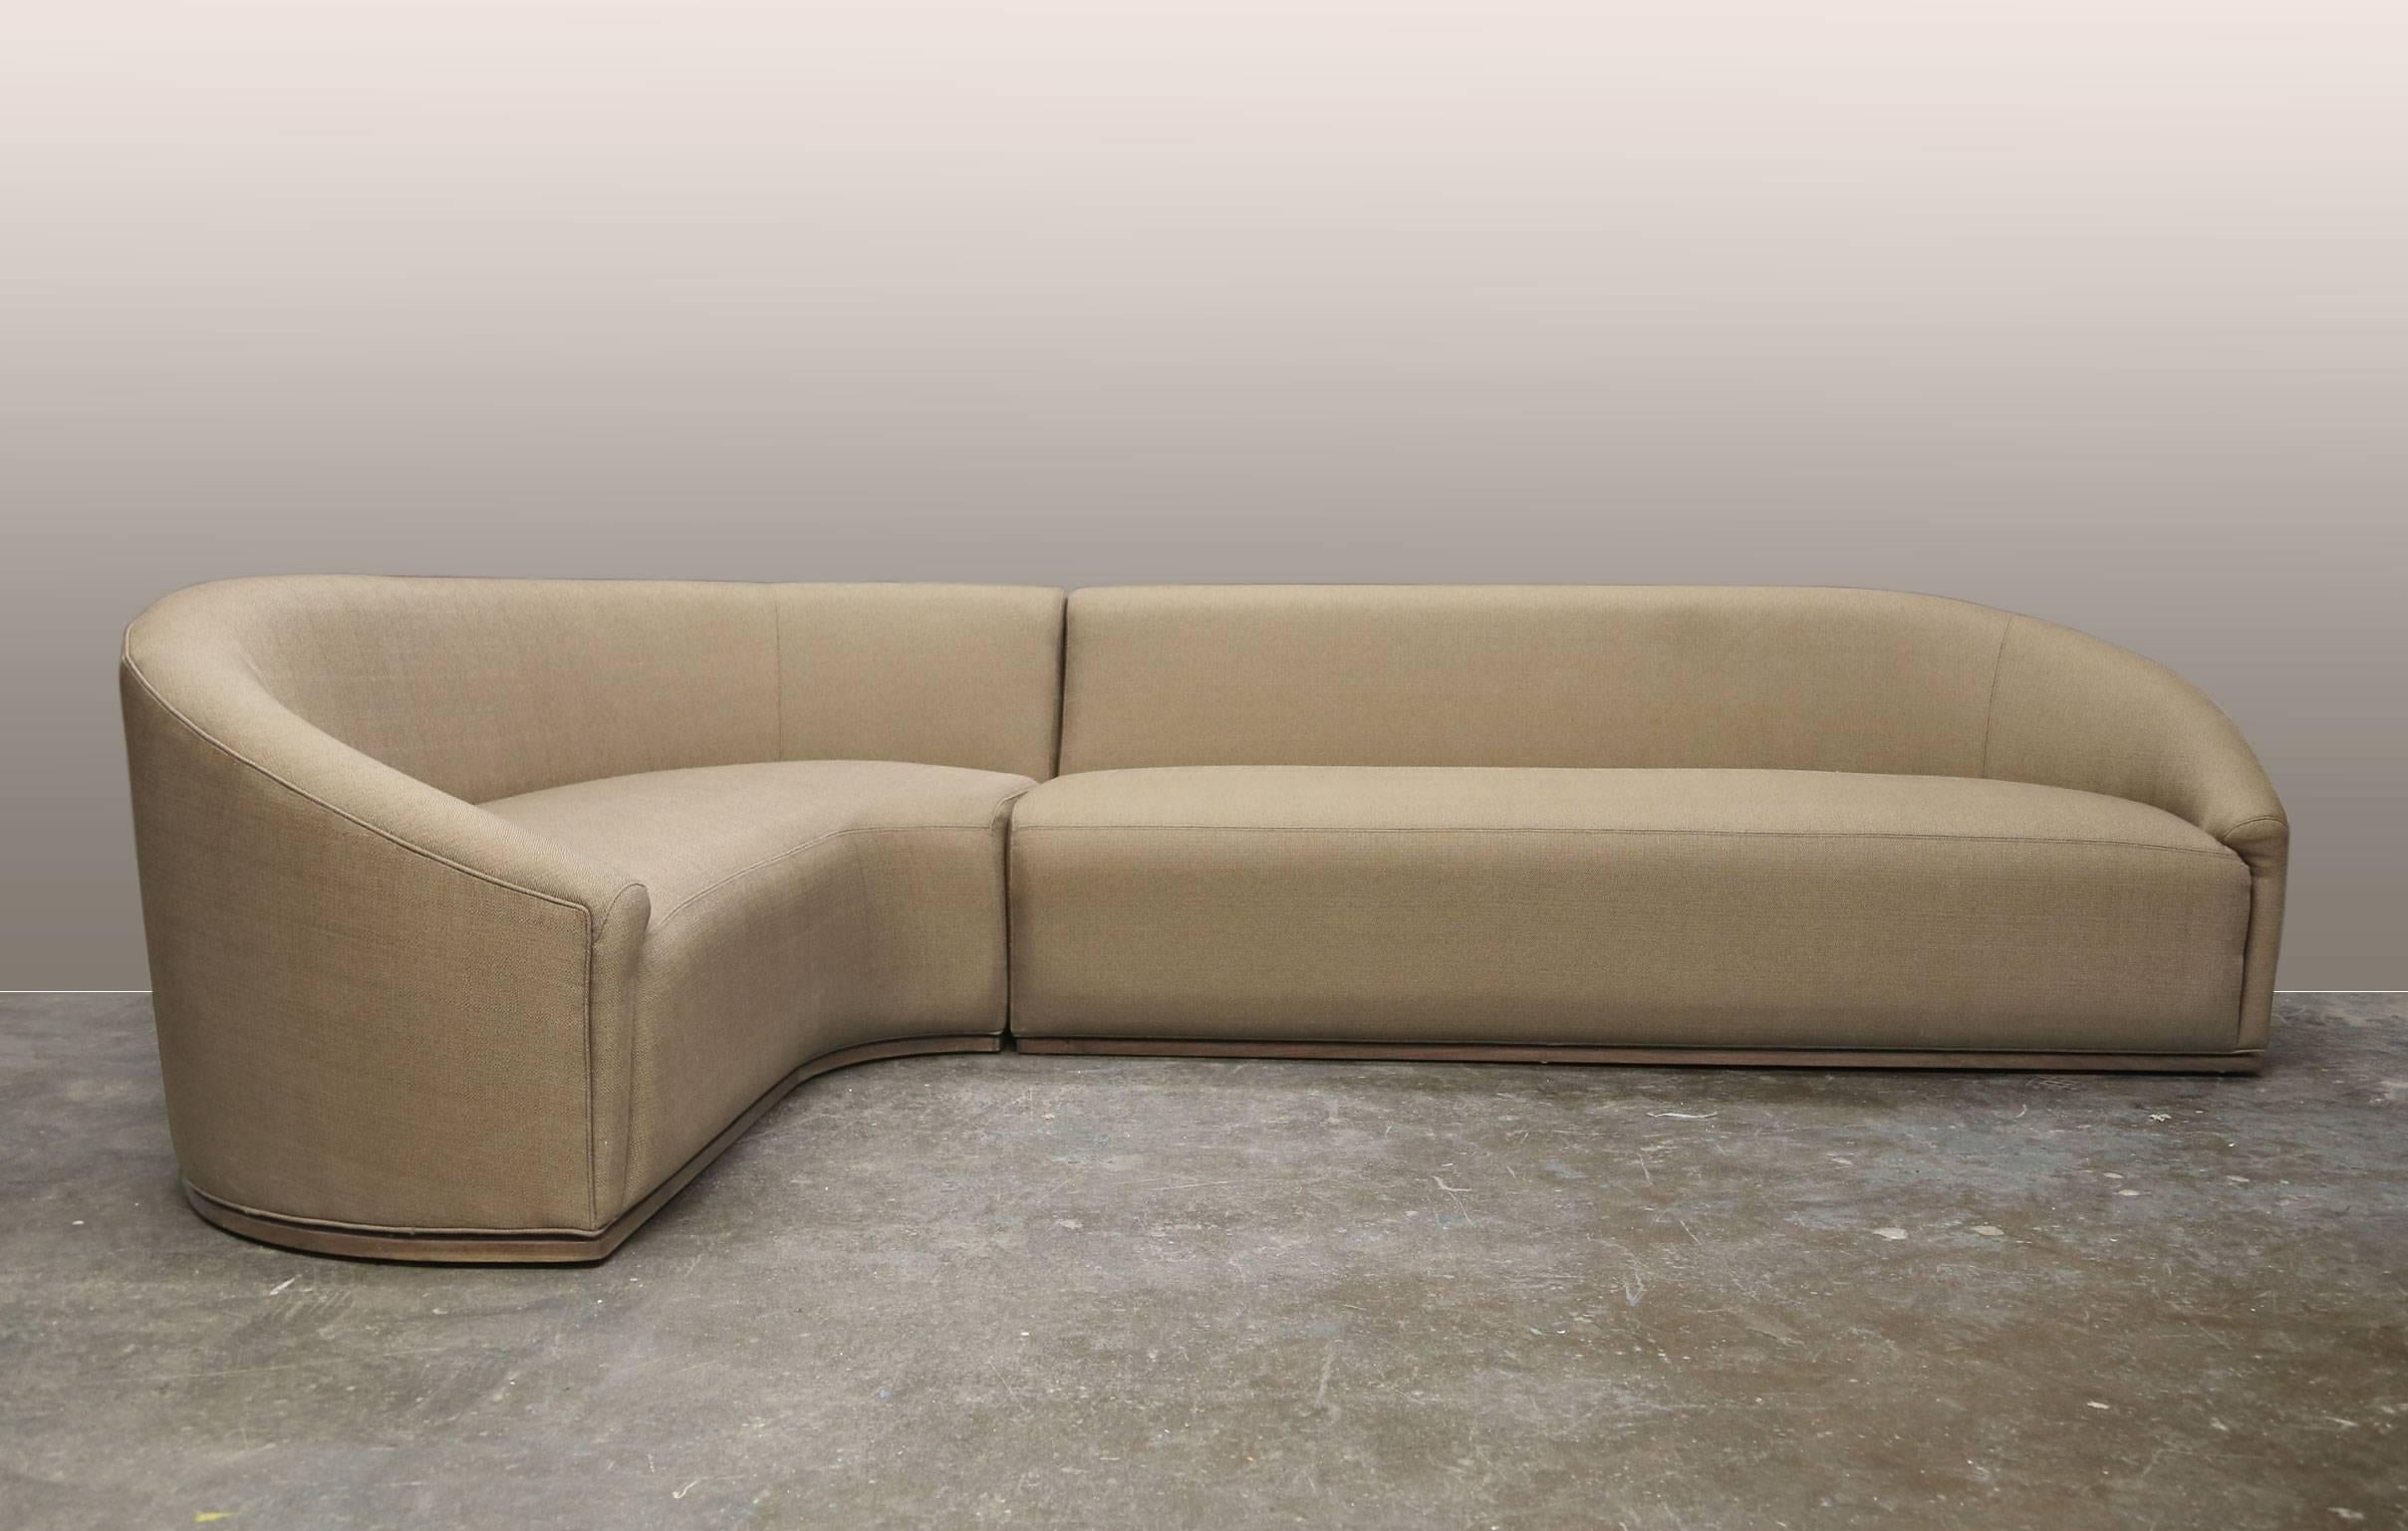 This subtle, curved sectional sofa comes in two parts. The elegant design sits upright and the soft lines evoke a seashell or a fluted wineglass. The design is a bit glam as well: it could be a welcome addition to a well appointed apartment or even